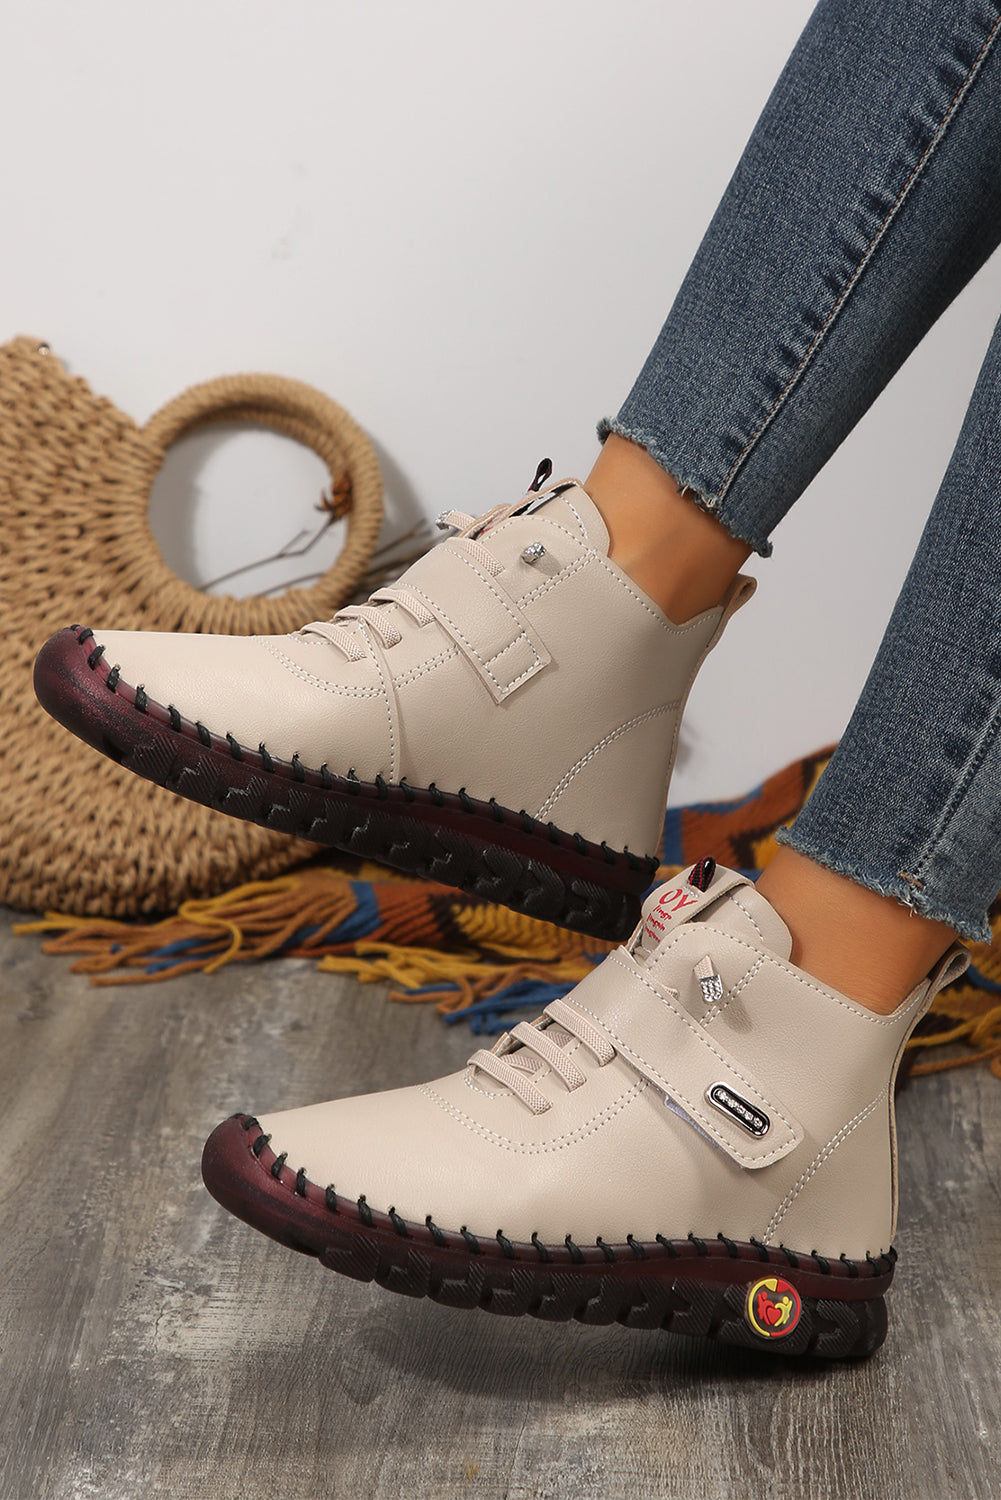 Snow White PU Leather Lace Up Slip On Ankle Boots